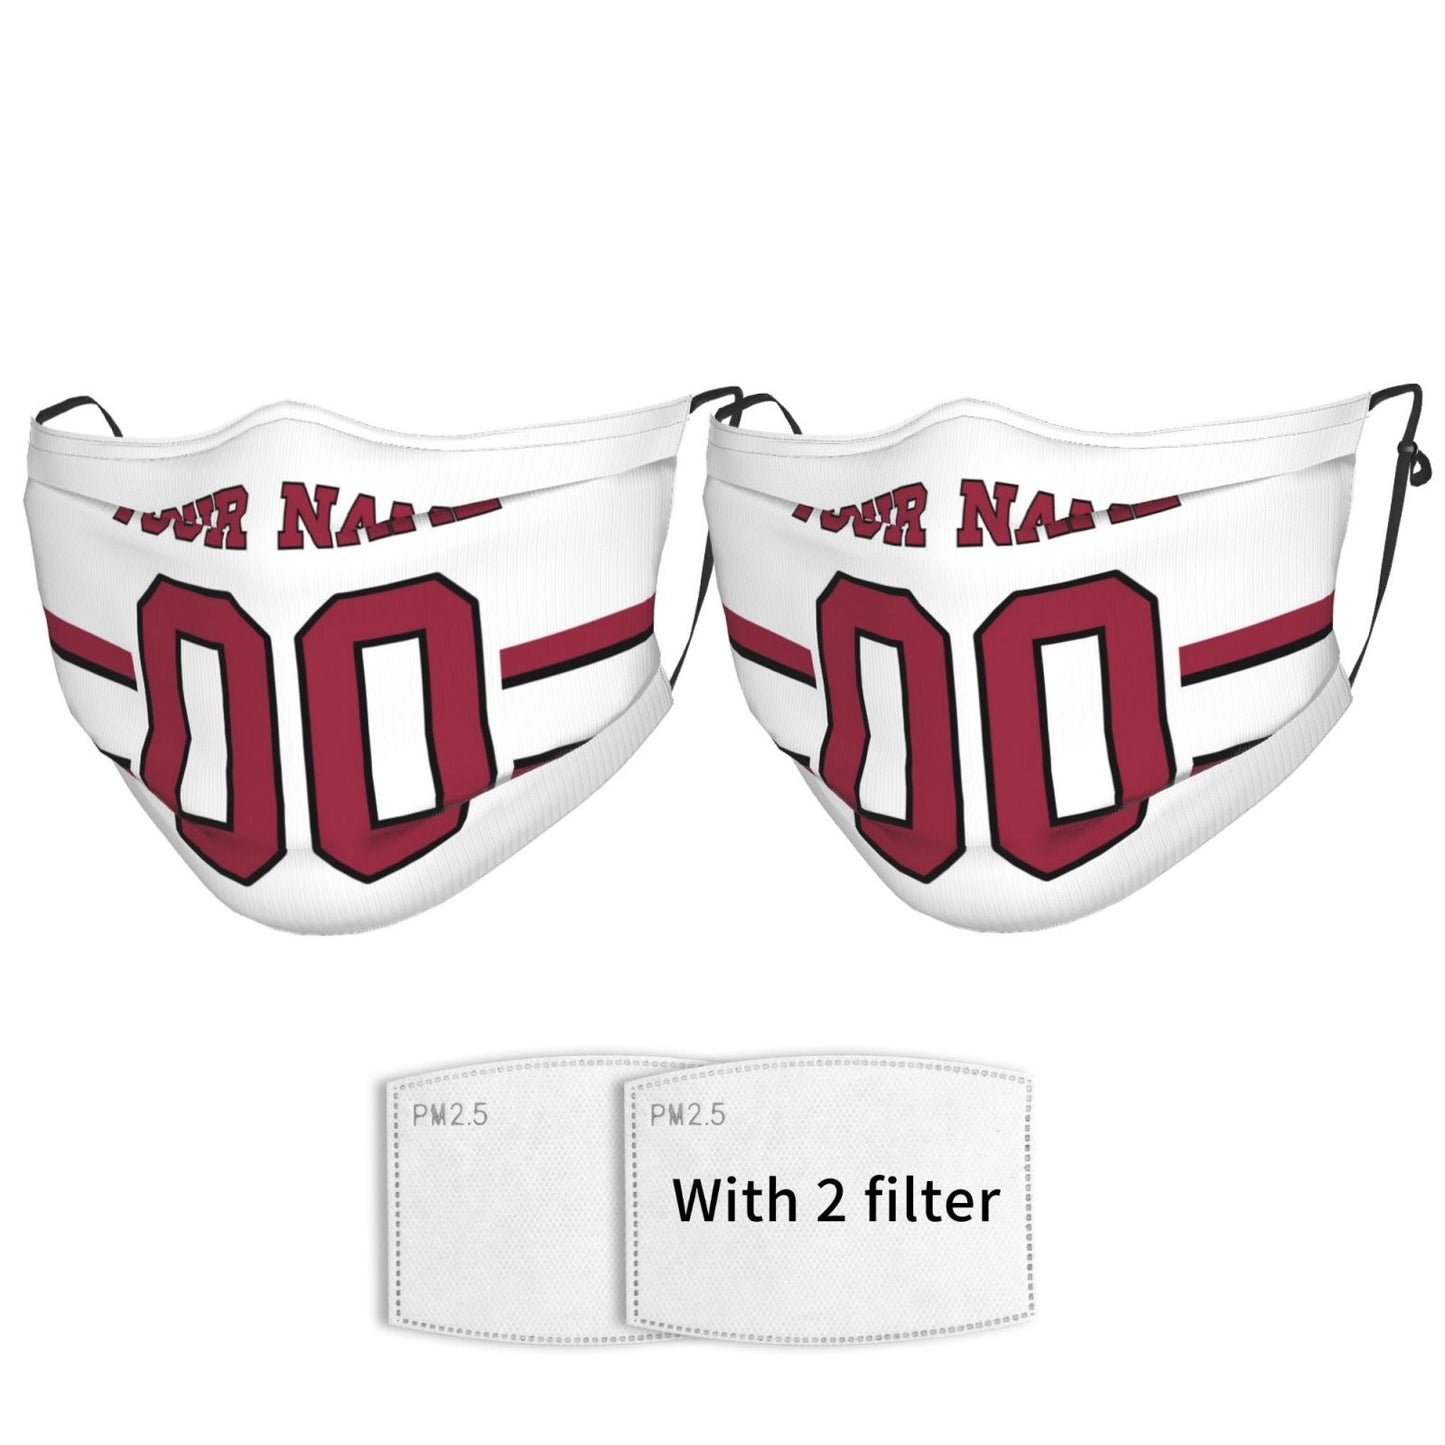 2-Pack Arizona Cardinals Face Covering Football Team Decorative Adult Face Mask With Filters PM 2.5 White